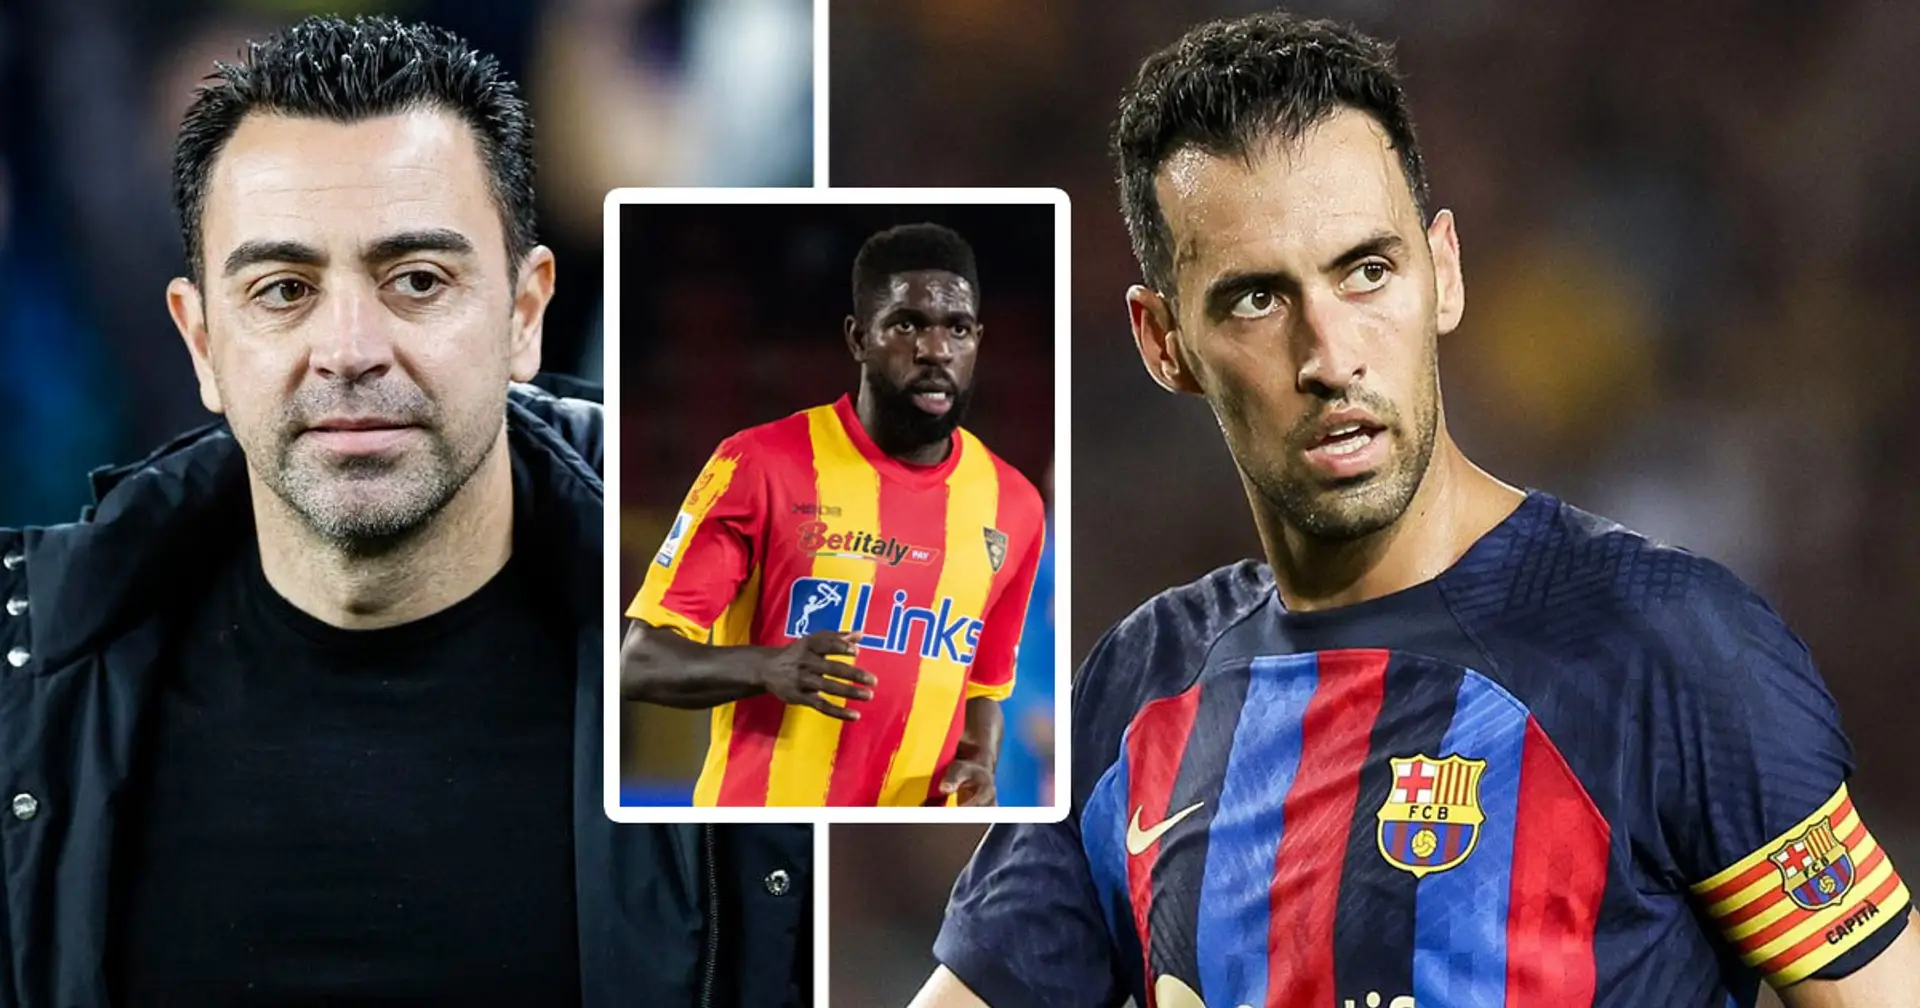 Midfielder Xavi wanted to succeed Busquets will be on the market this summer — one way Barca could afford him